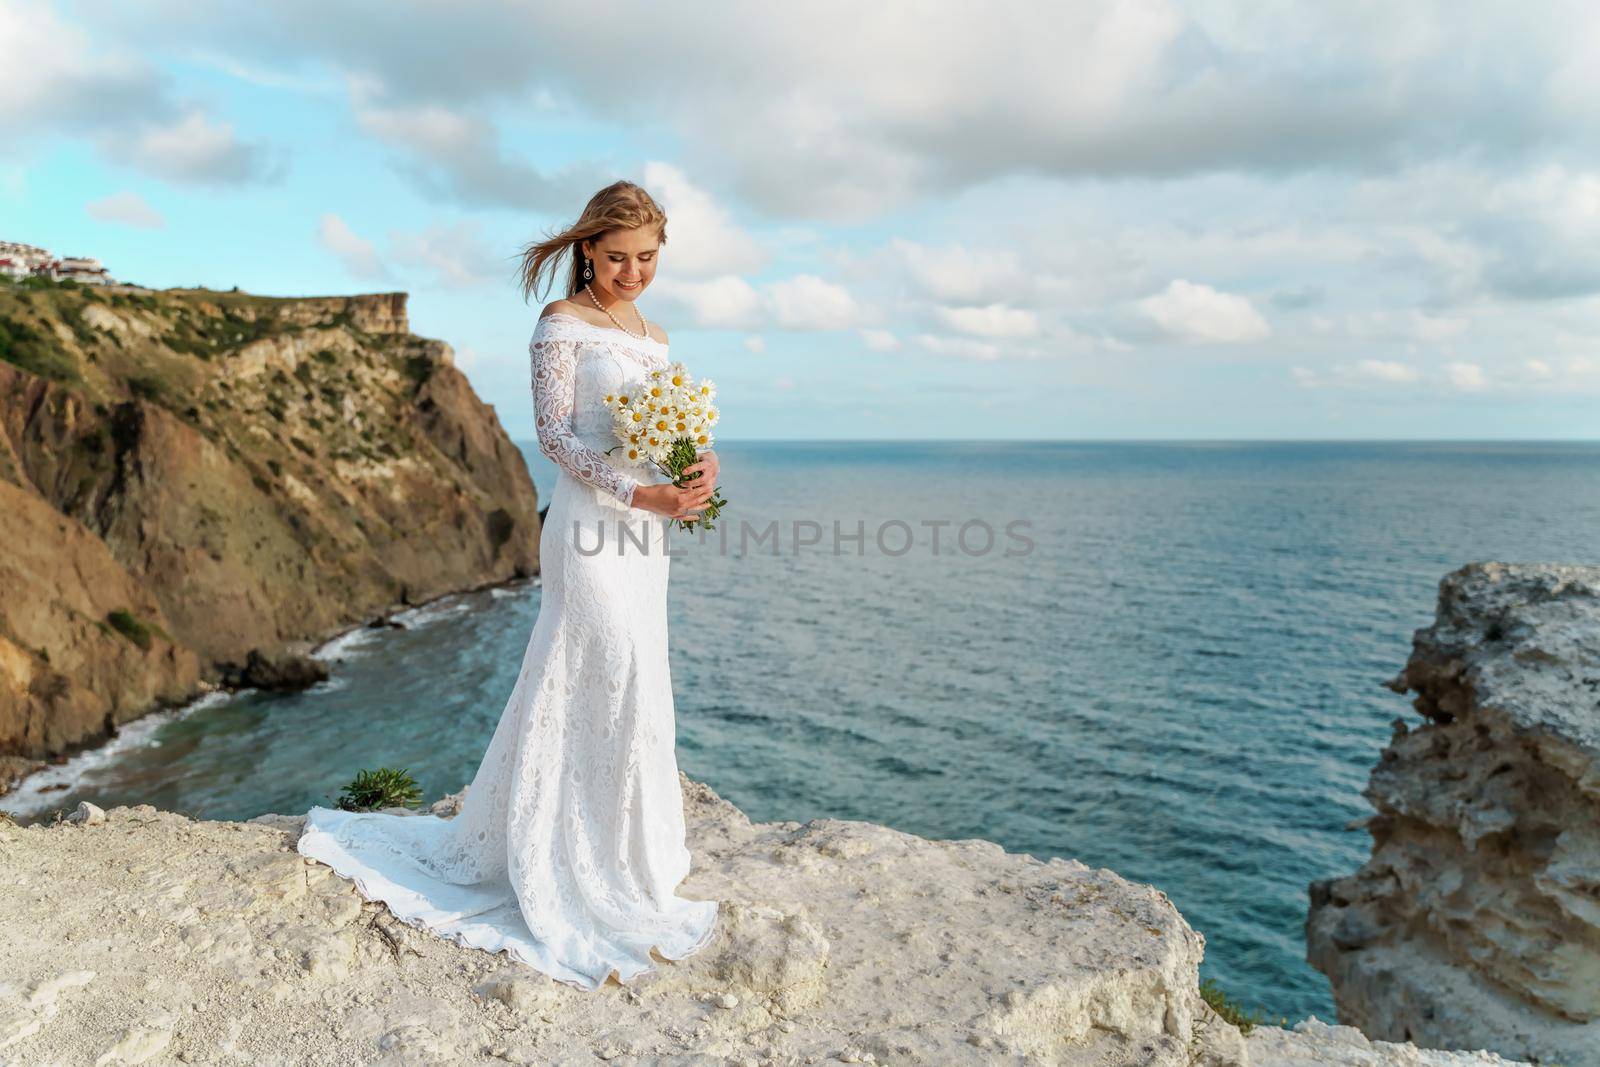 Summer bouquet of field daisies in the hands of a bride in a white dress against the backdrop of the sea. She stands on a rock above the sea. Copy space. The concept of calmness, silence and unity with nature